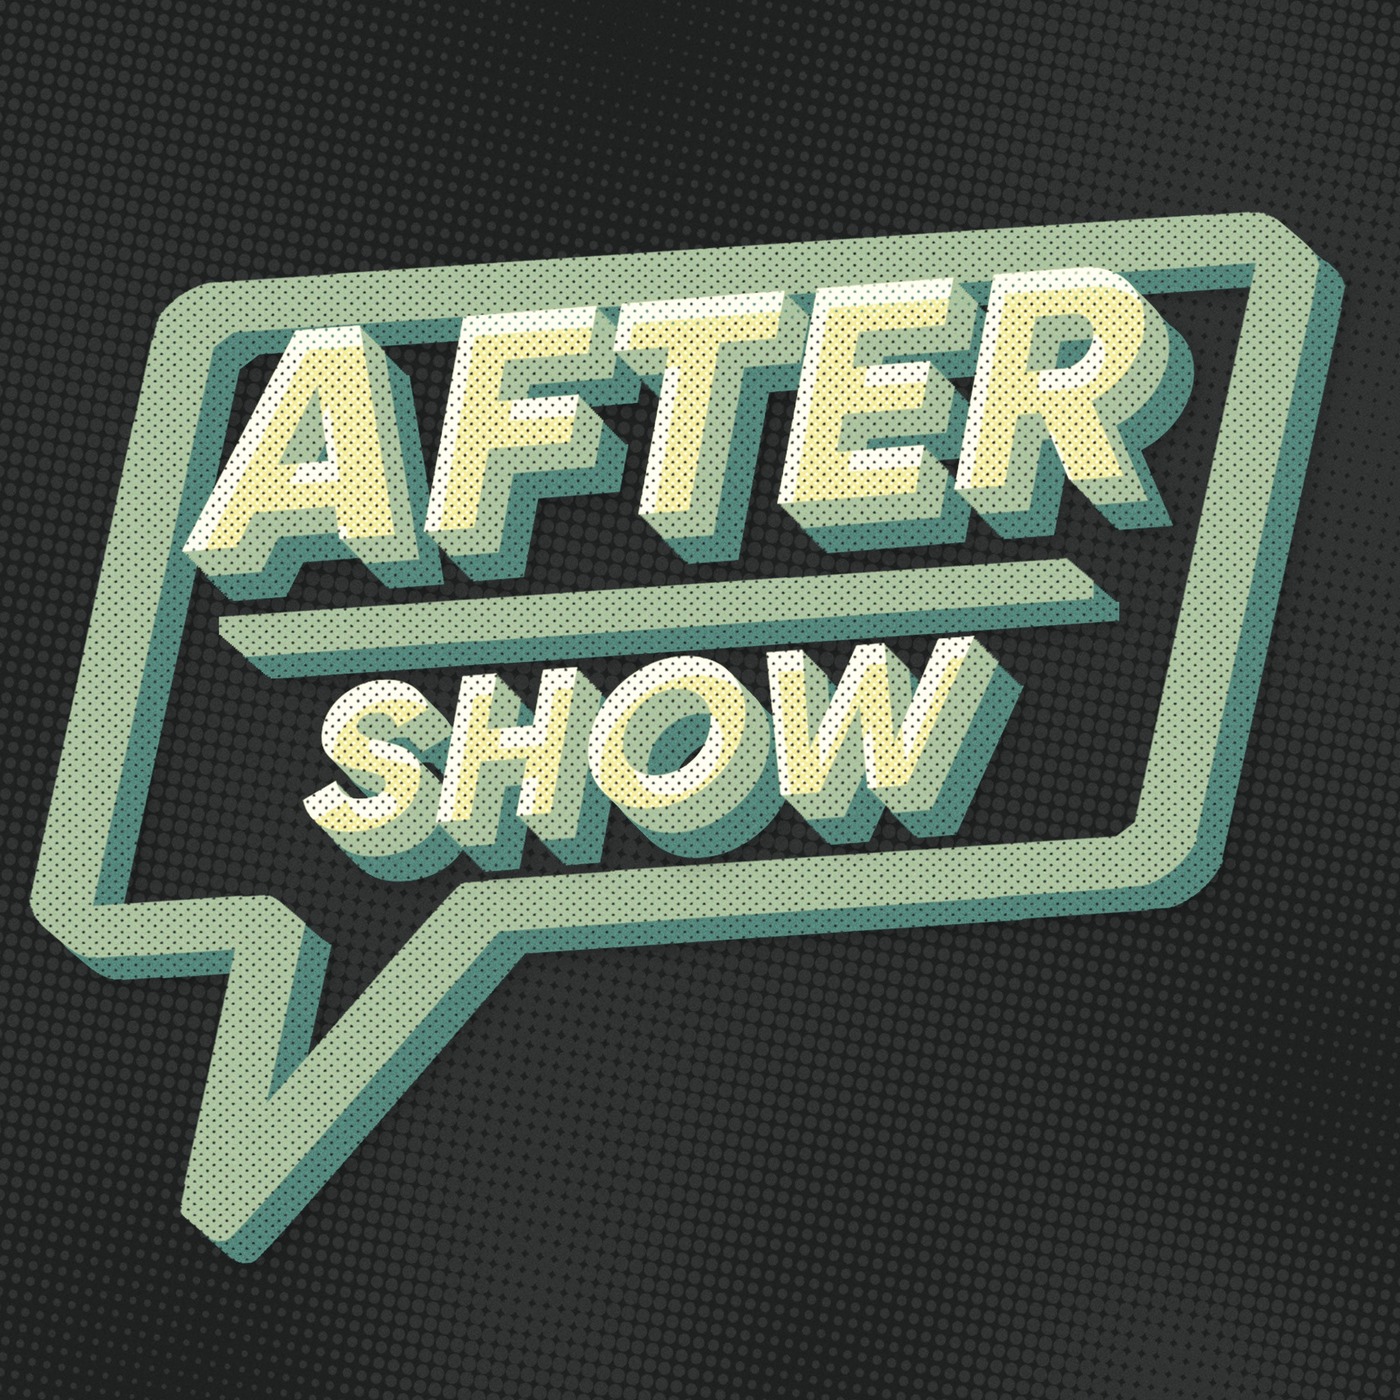 The Last Of Us Episode 2 Aftershow